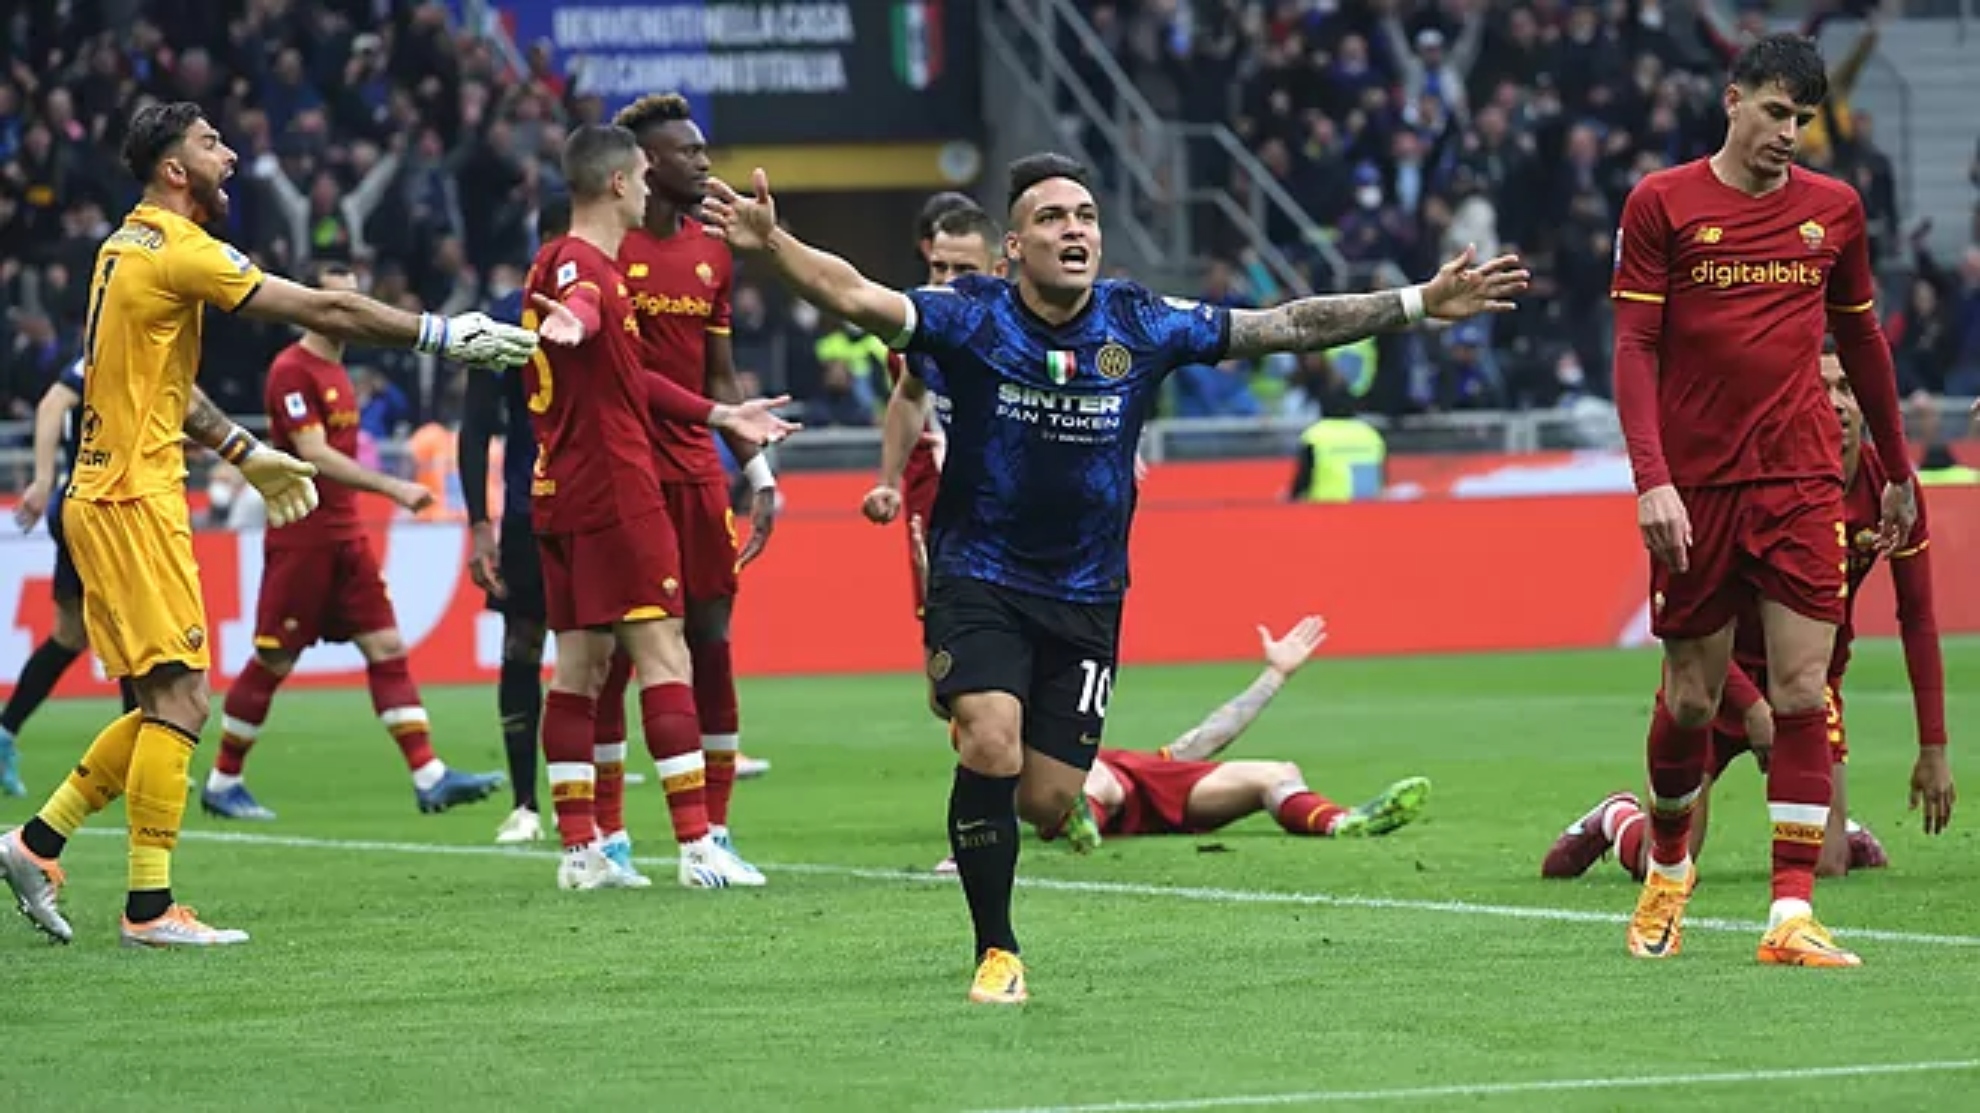 Inter easily beats Roma and takes the lead